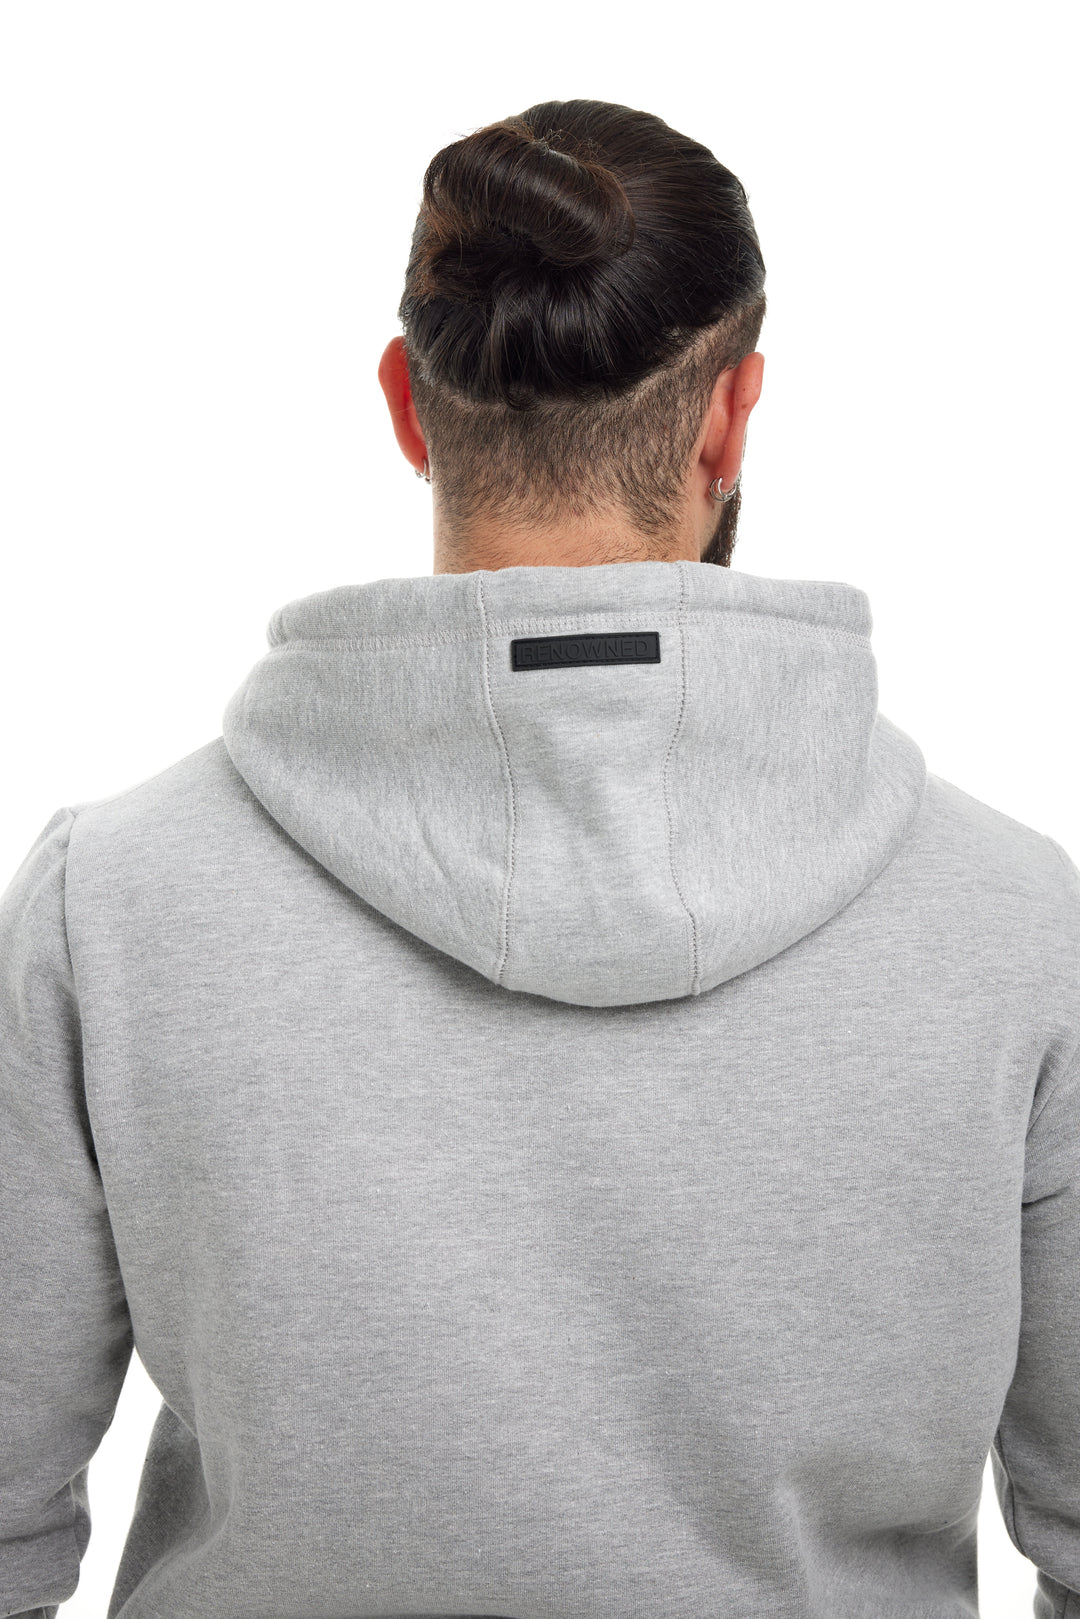 Young man modeling the Heather Grey Premium 400gsm Heavyweight Hoodie by RENOWNED WEAR